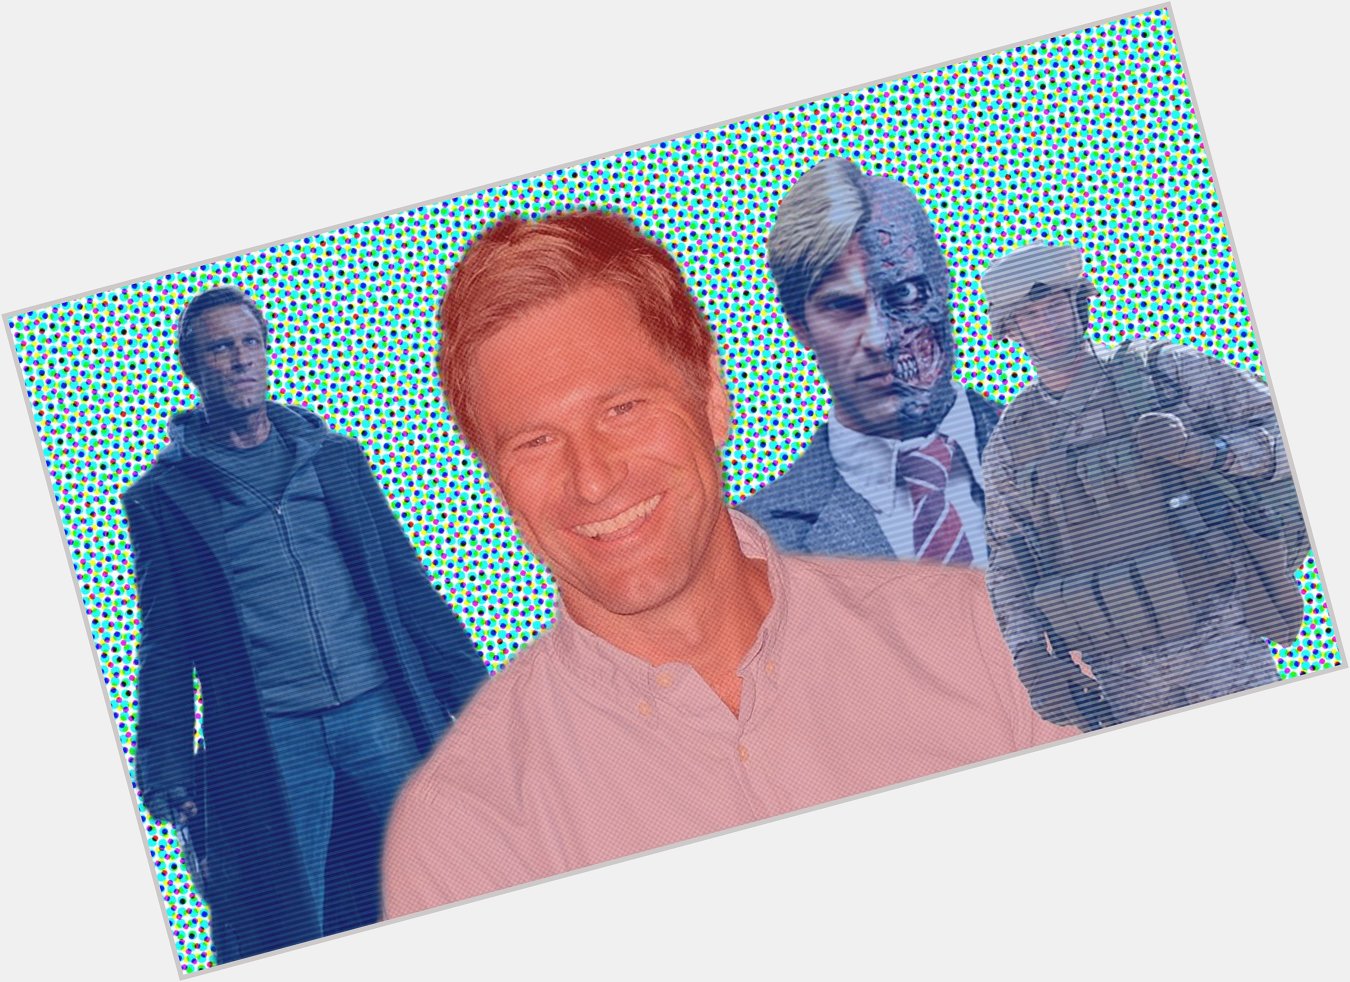 Happy birthday to actor Aaron Eckhart! What was your favorite role he played? 